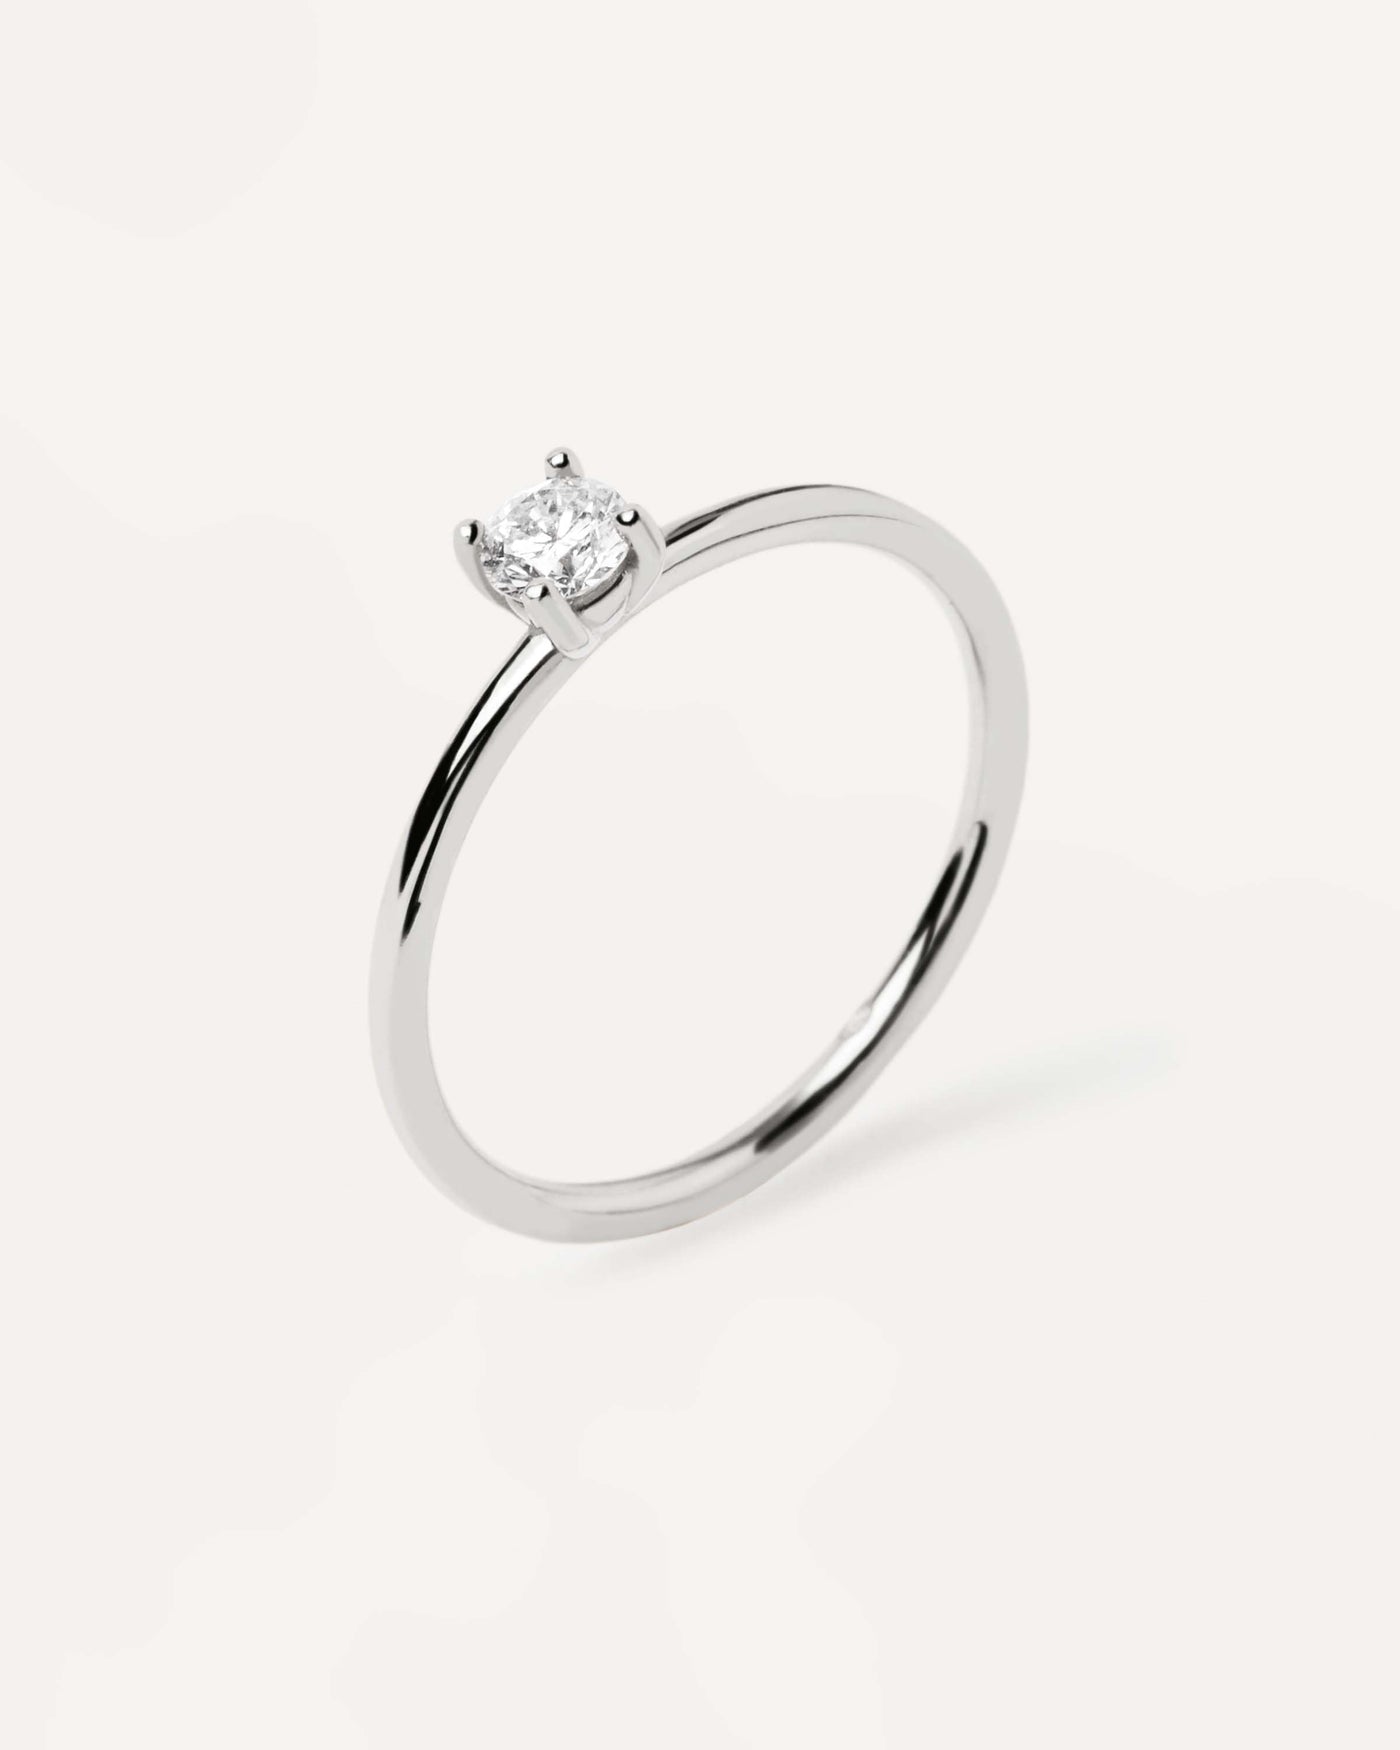 2023 Selection | Diamonds and White Gold Solitaire Medium Ring. 18K white gold Solitaire ring set with a 0.20 carat diamond. Get the latest arrival from PDPAOLA. Place your order safely and get this Best Seller. Free Shipping.